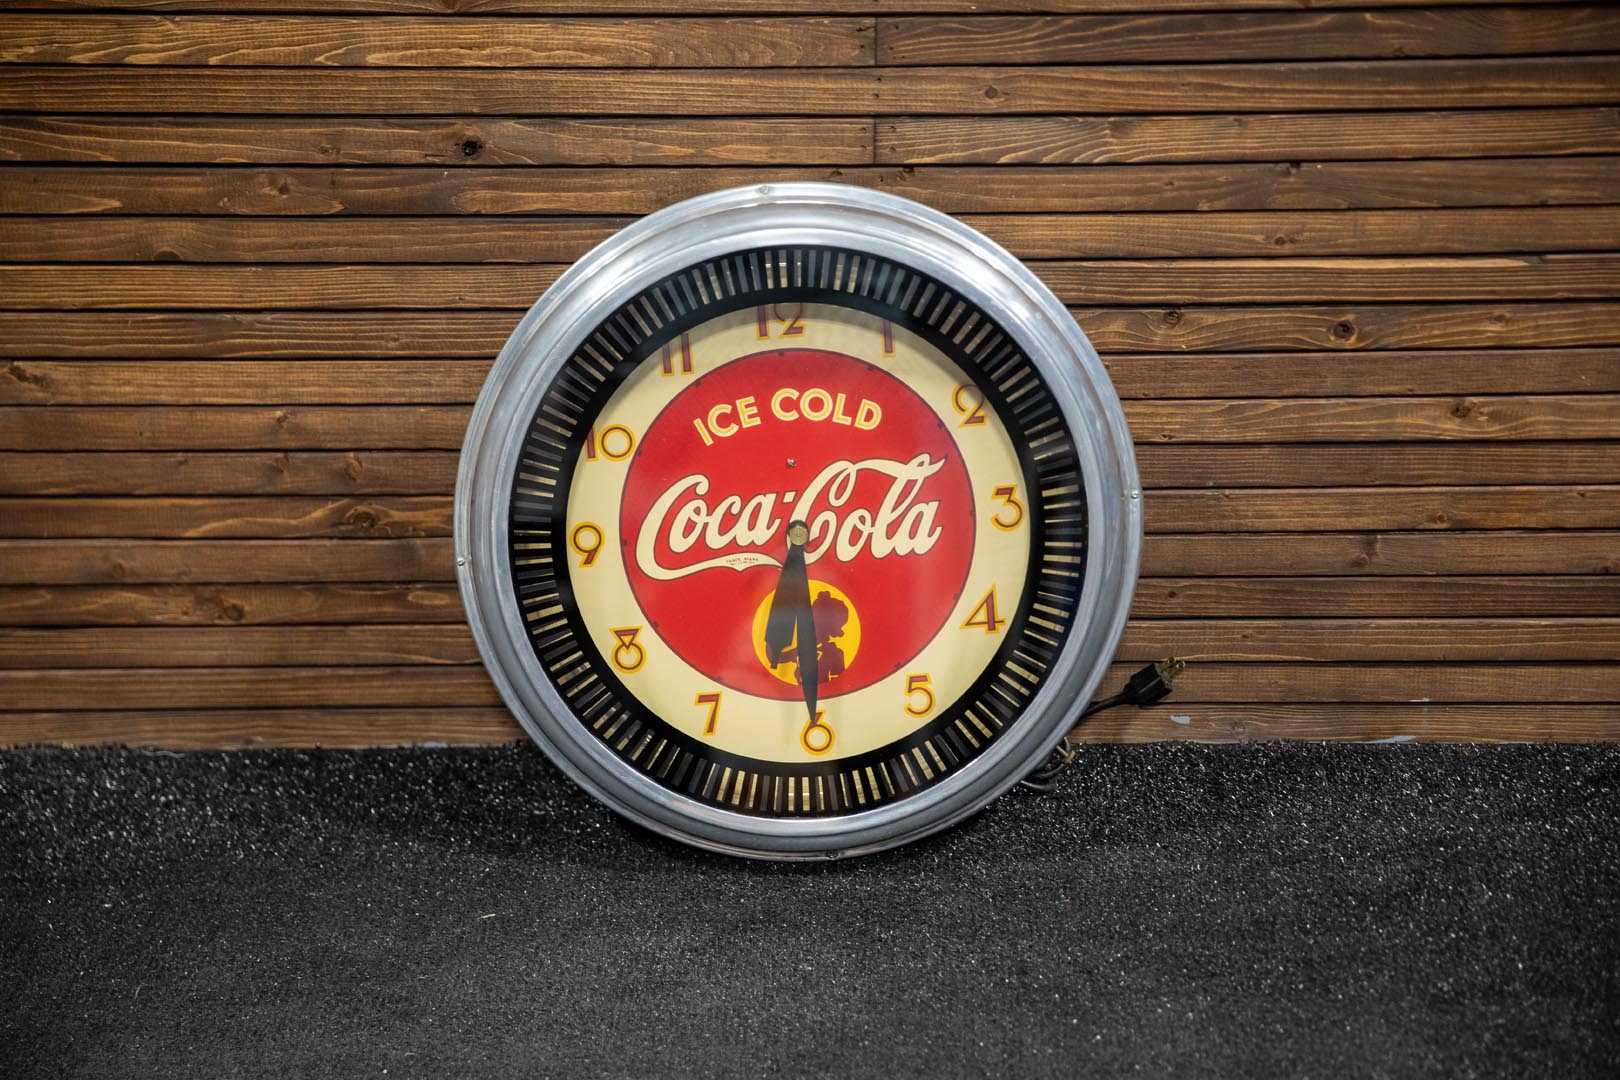  Coca-Cola Spinner Lighted Cloc k - Reproduction 